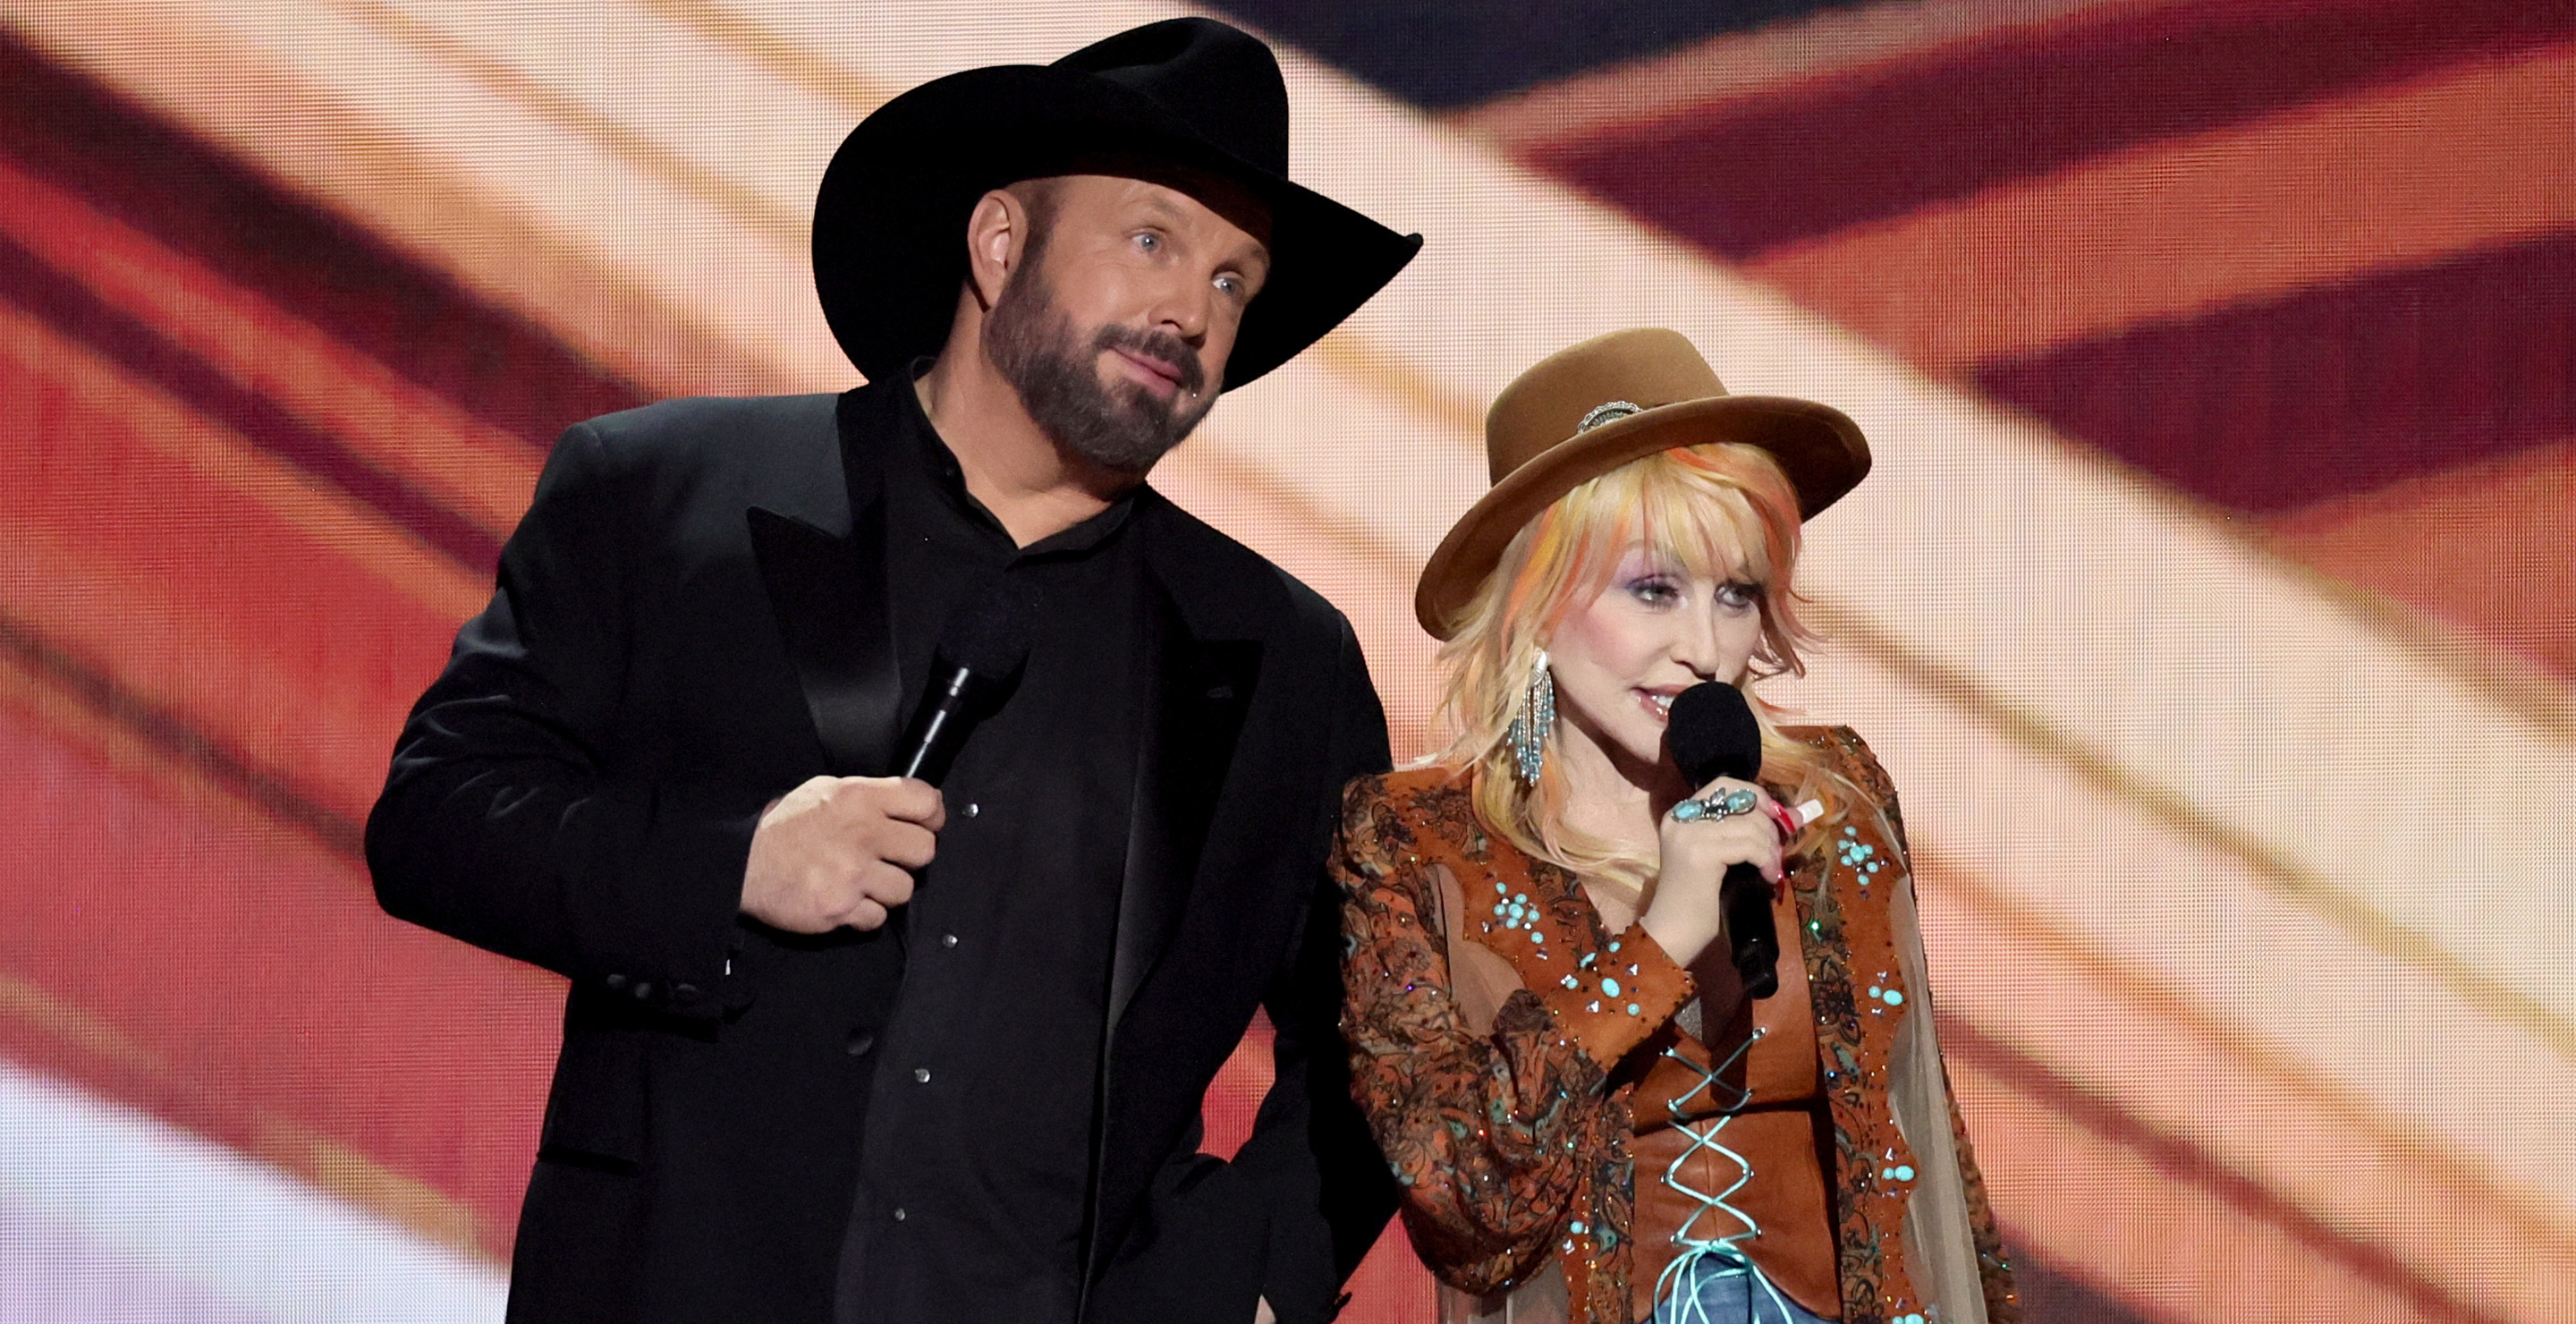 Why Dolly Parton And Garth Brooks Didn’t Return To Host The ACM Awards